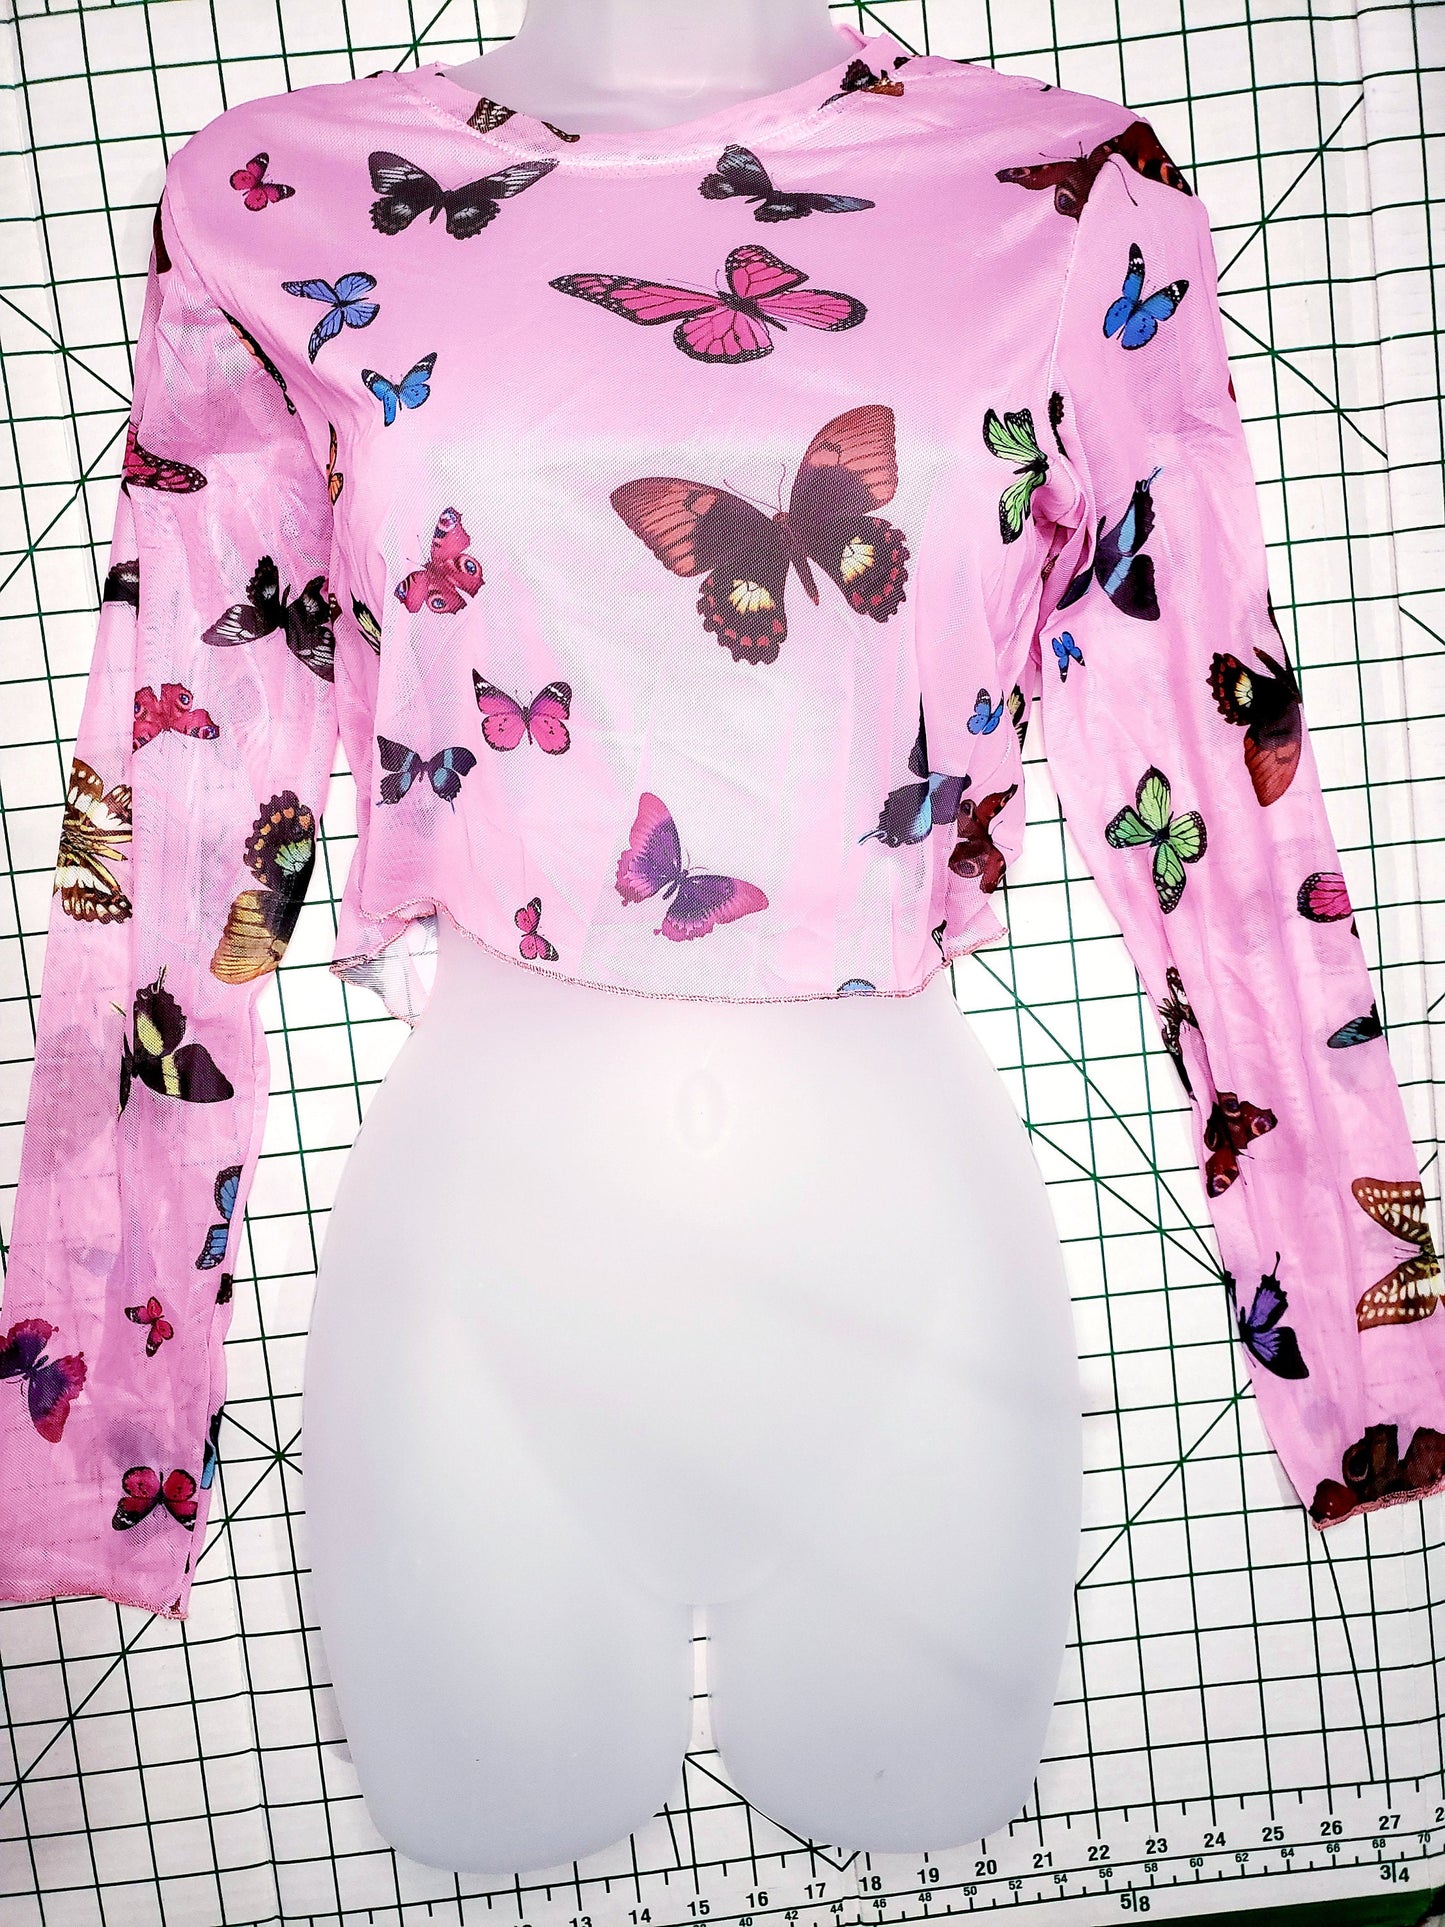 Butterfly Sheer Mesh Going out tops for women long sleeve shirt funky 90s trendy colorful see through blue pink kawaii